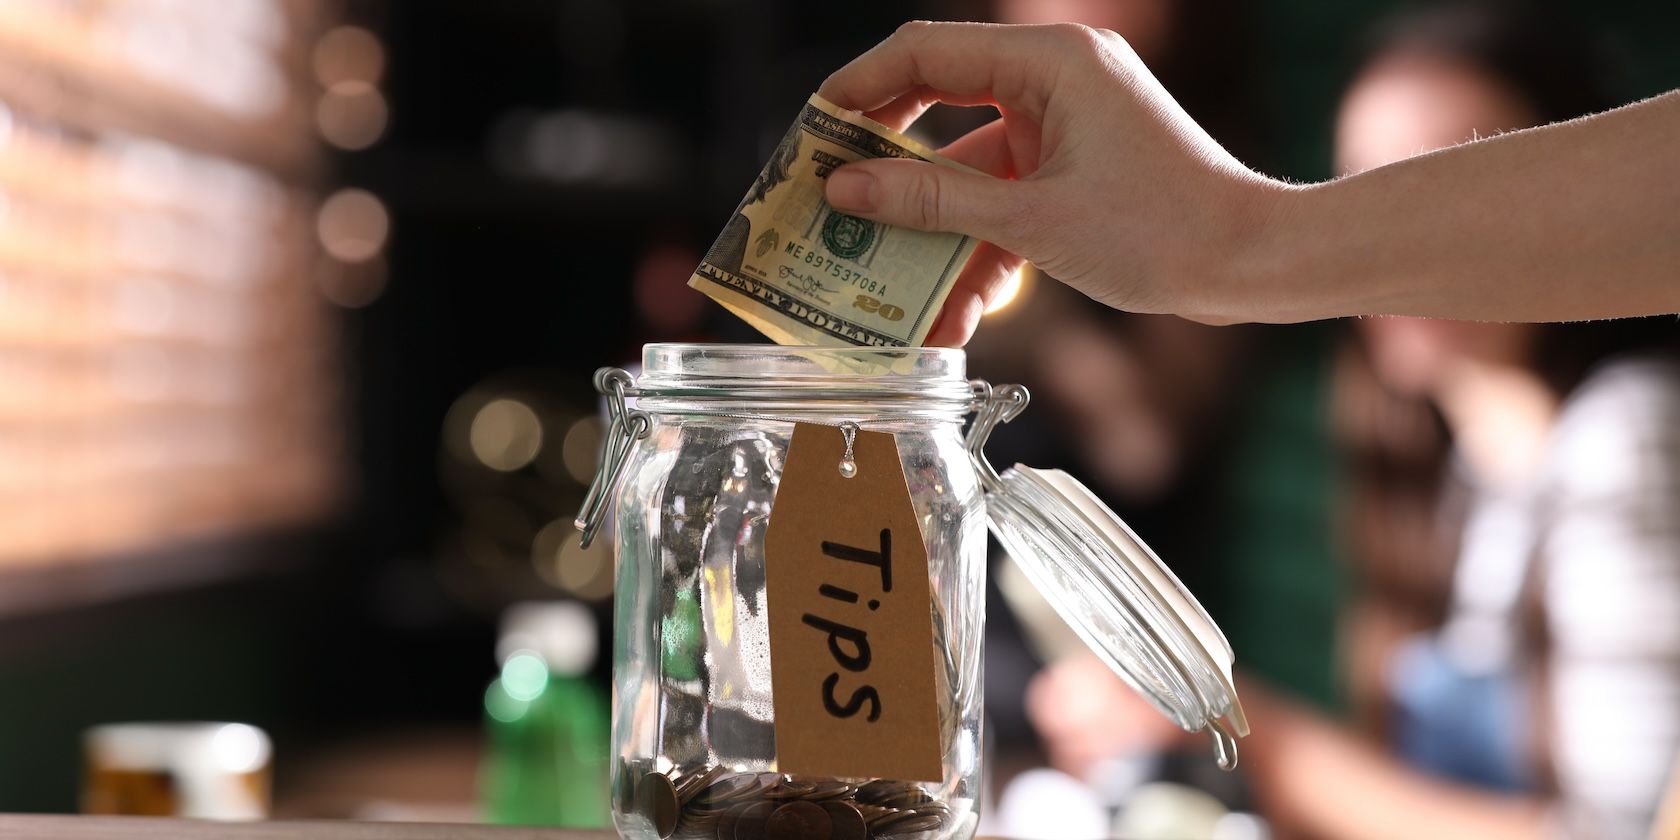 A hand placing several dollar bills into a glass jar labelled “tips”